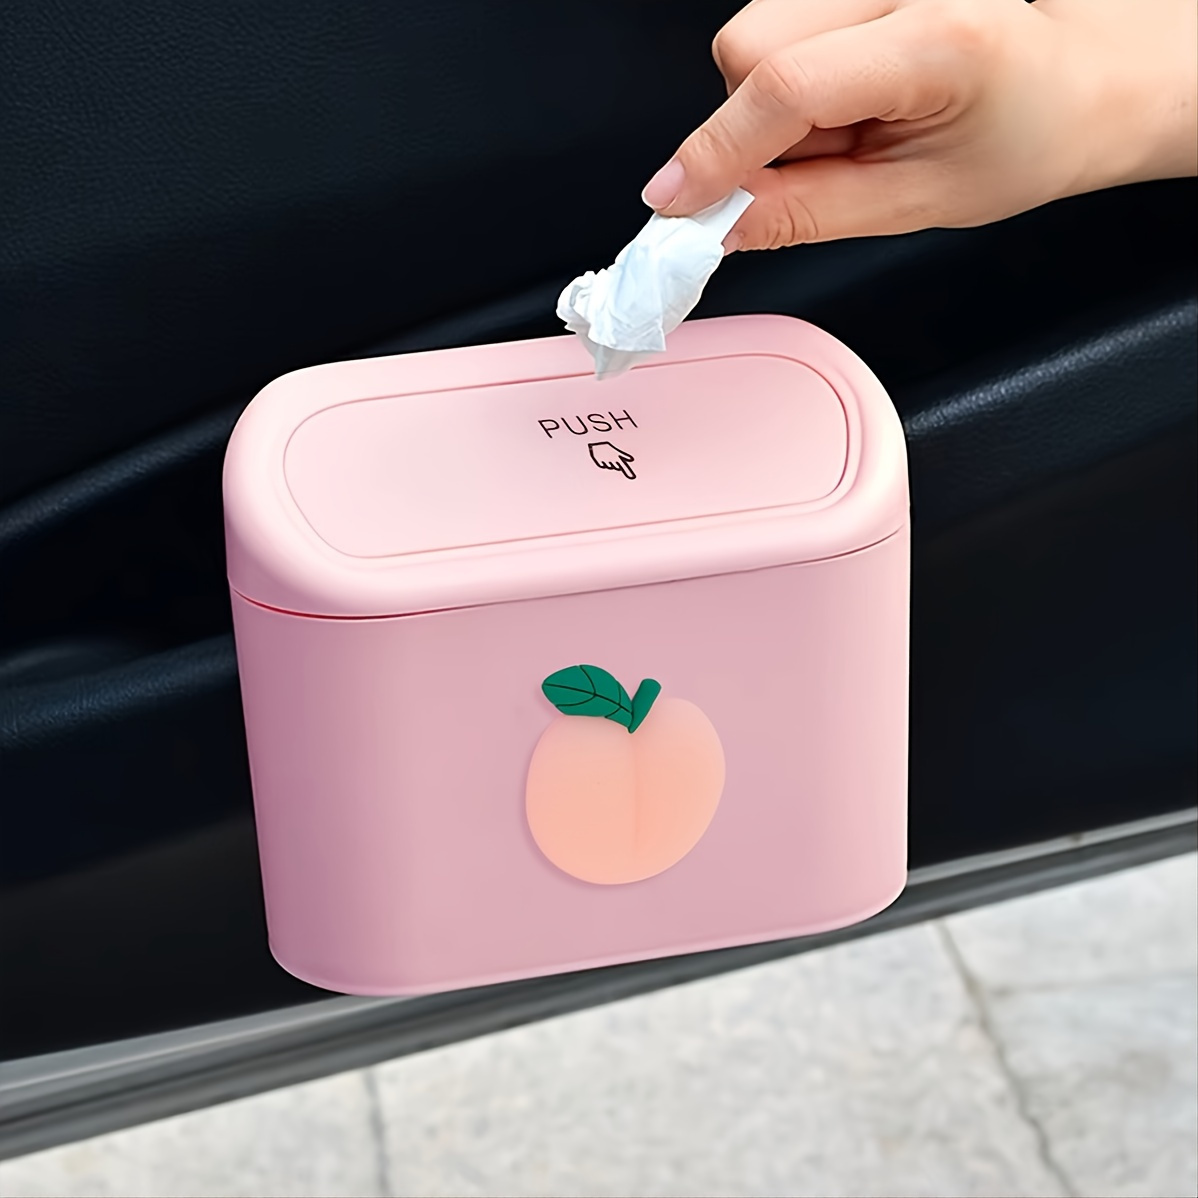 

Cute Cartoon Car Trash Can With Flip-top Lid - Keep Your Car Clean And Tidy!